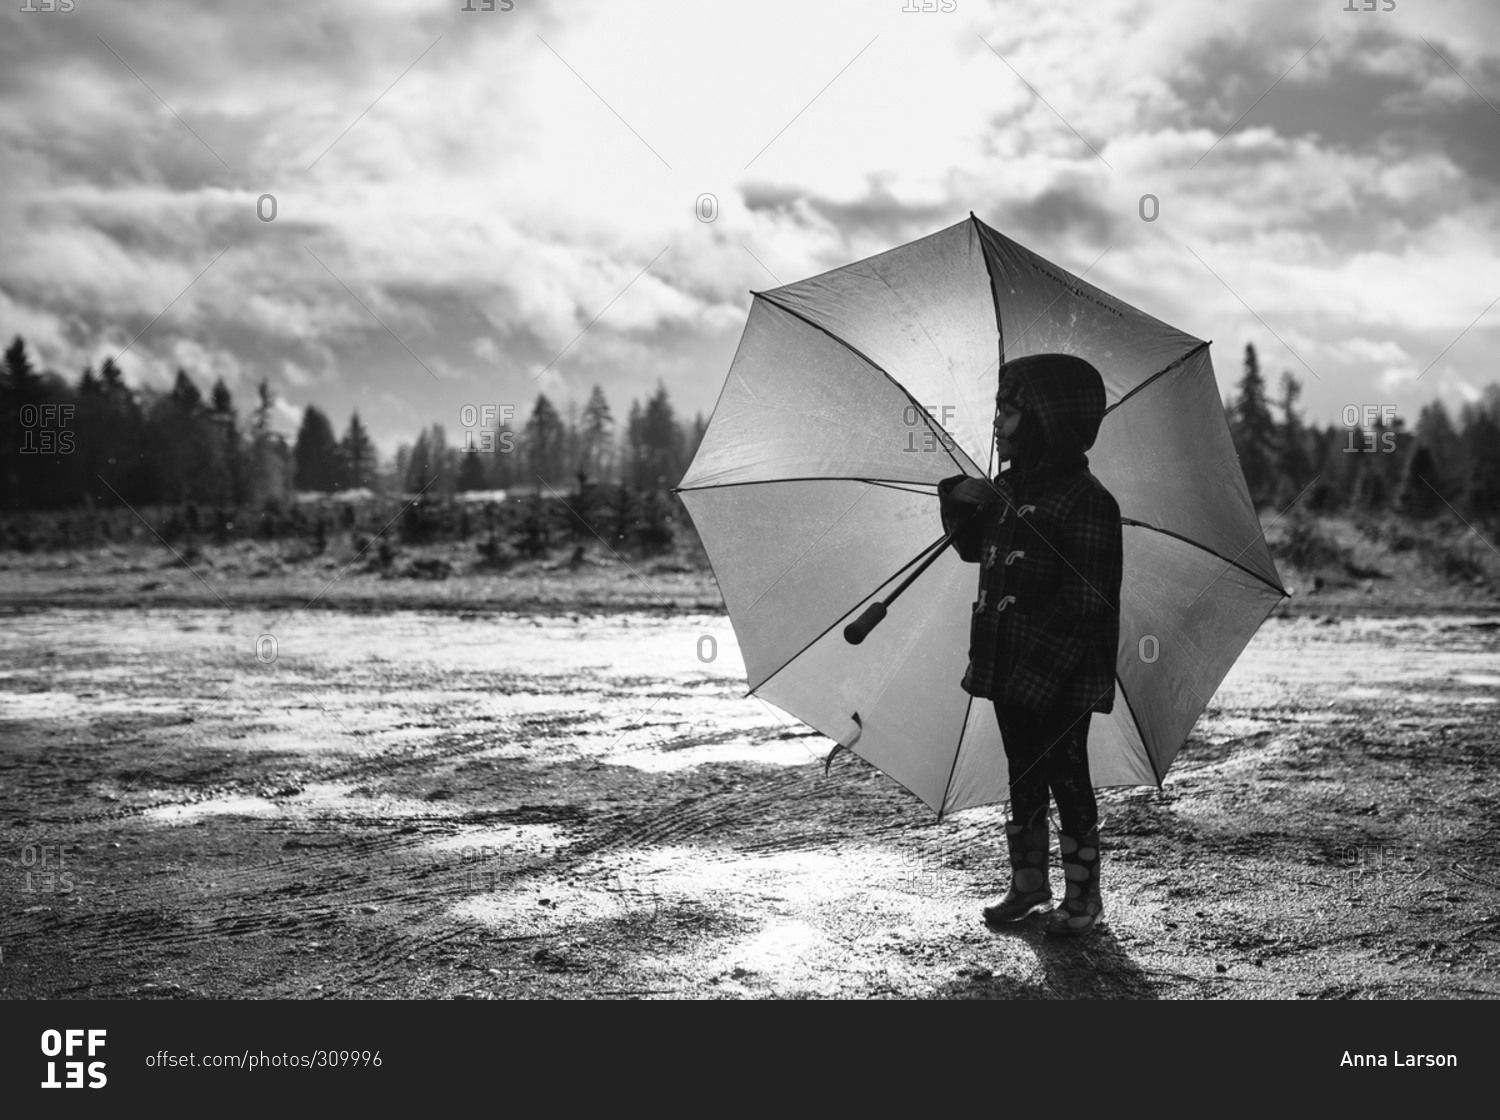 Little girl standing in a muddy field with an umbrella